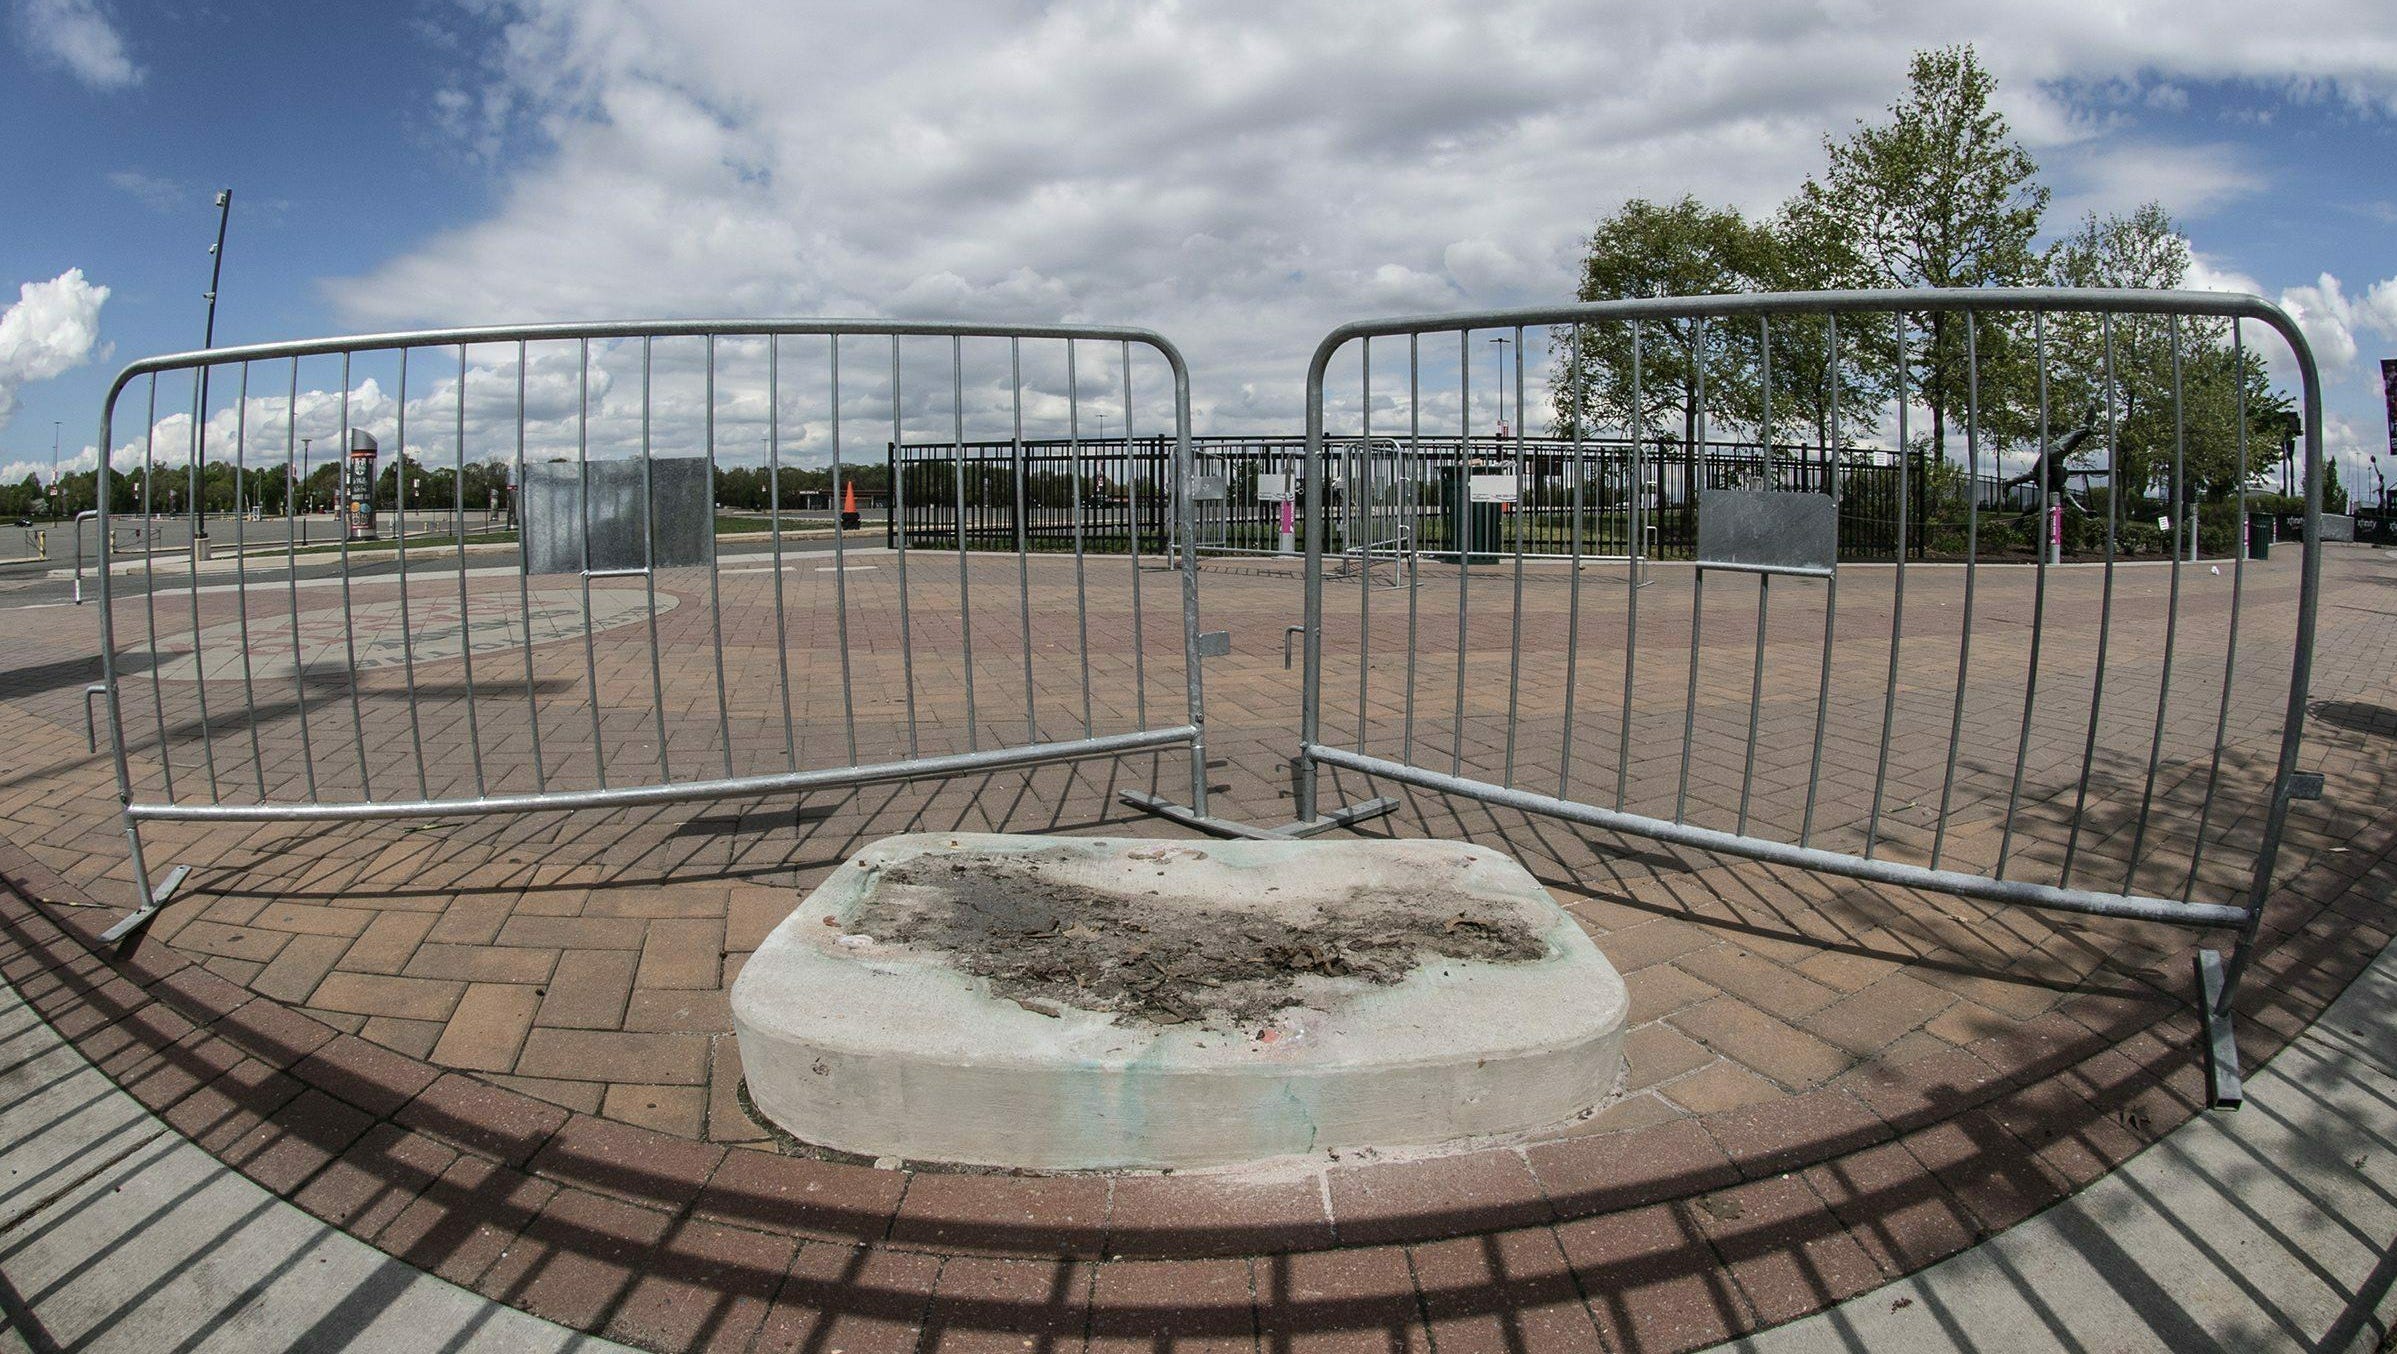 A concrete stand is all that’s left where the statue of Kate Smith was displayed at Xfinity Live near the sports stadium in South Philadelphia. Sunday, April 21, 2019. The Philadelphia Flyers have removed a statue of late singer Kate Smith outside NHL team's arena.